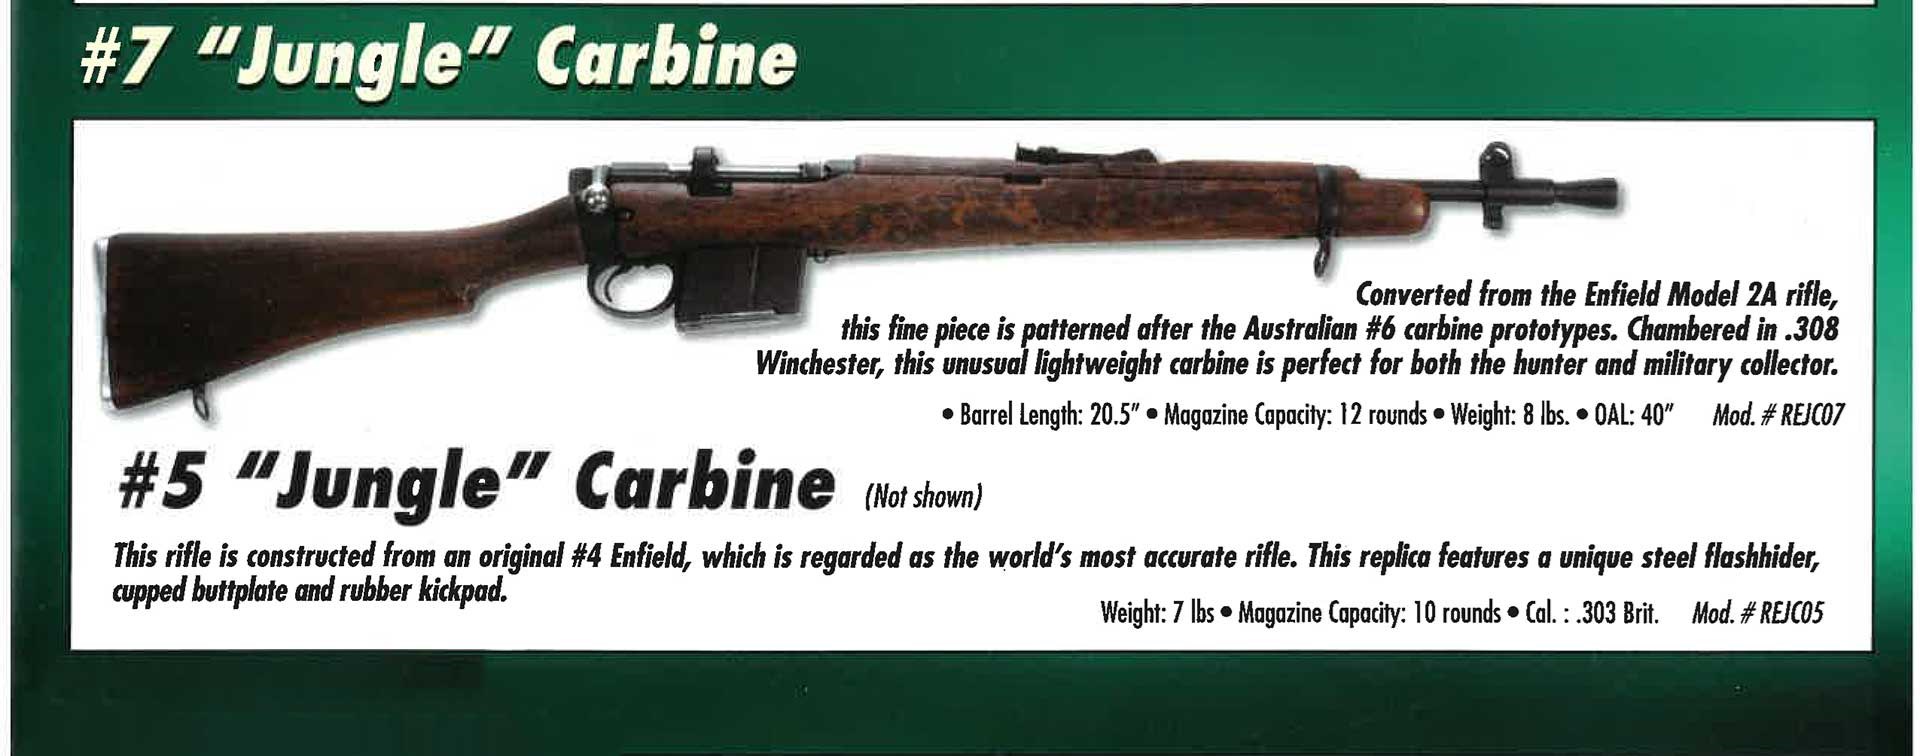 Gibbs #7 Jungle carbine shown in a catalog page from the company.